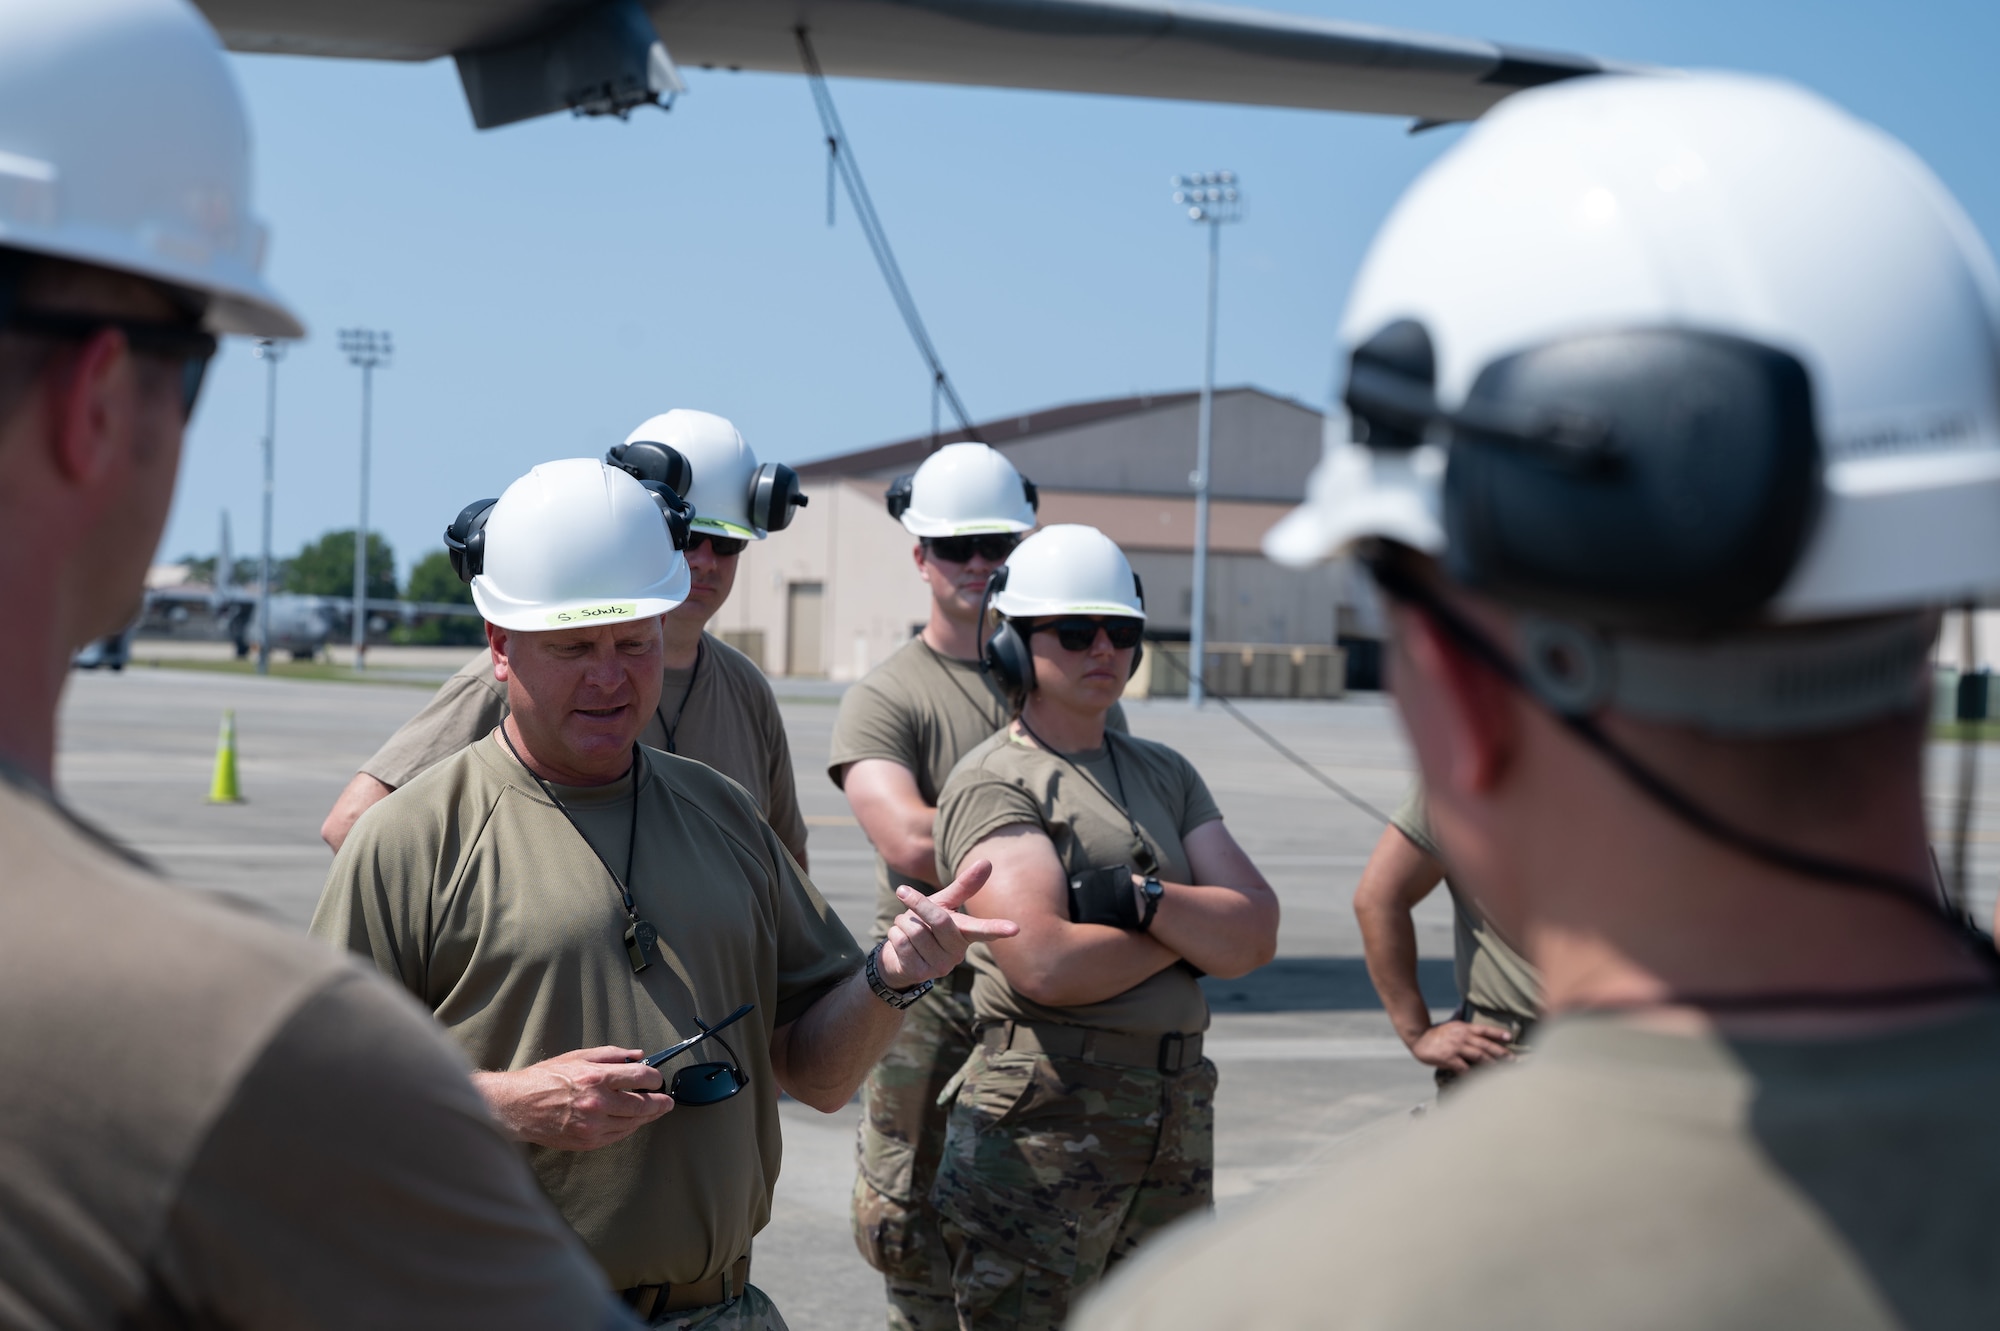 U.S. Air Force Senior Master Sgt. Spencer Schulz, a Pennsylvania Air National Guard, 193rd Special Operations Wing, propulsion flight chief, debriefs airmen from Pennsylvania Air National Guard’s 193rd Special Operations Wing and 1st Special Operations Maintenance Squadron after a joint training event on May 17, 2022, at Hurlburt Field, Florida.